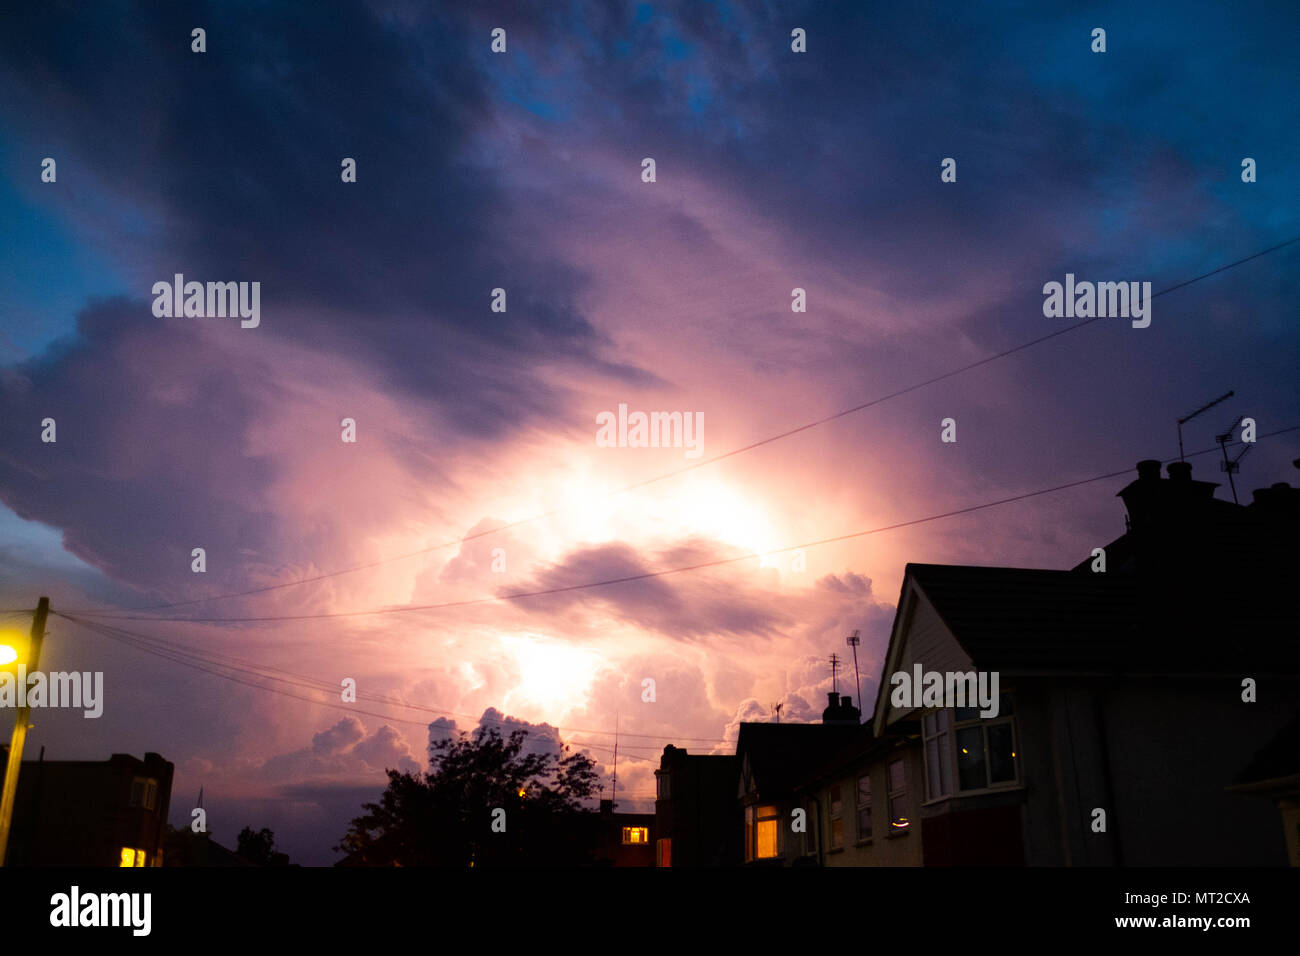 London, England. 27th May 2018. Sheet lightening fills the sky over Harrow with no thunder to be heard. ©Tim Ring/Alamy Live News Stock Photo